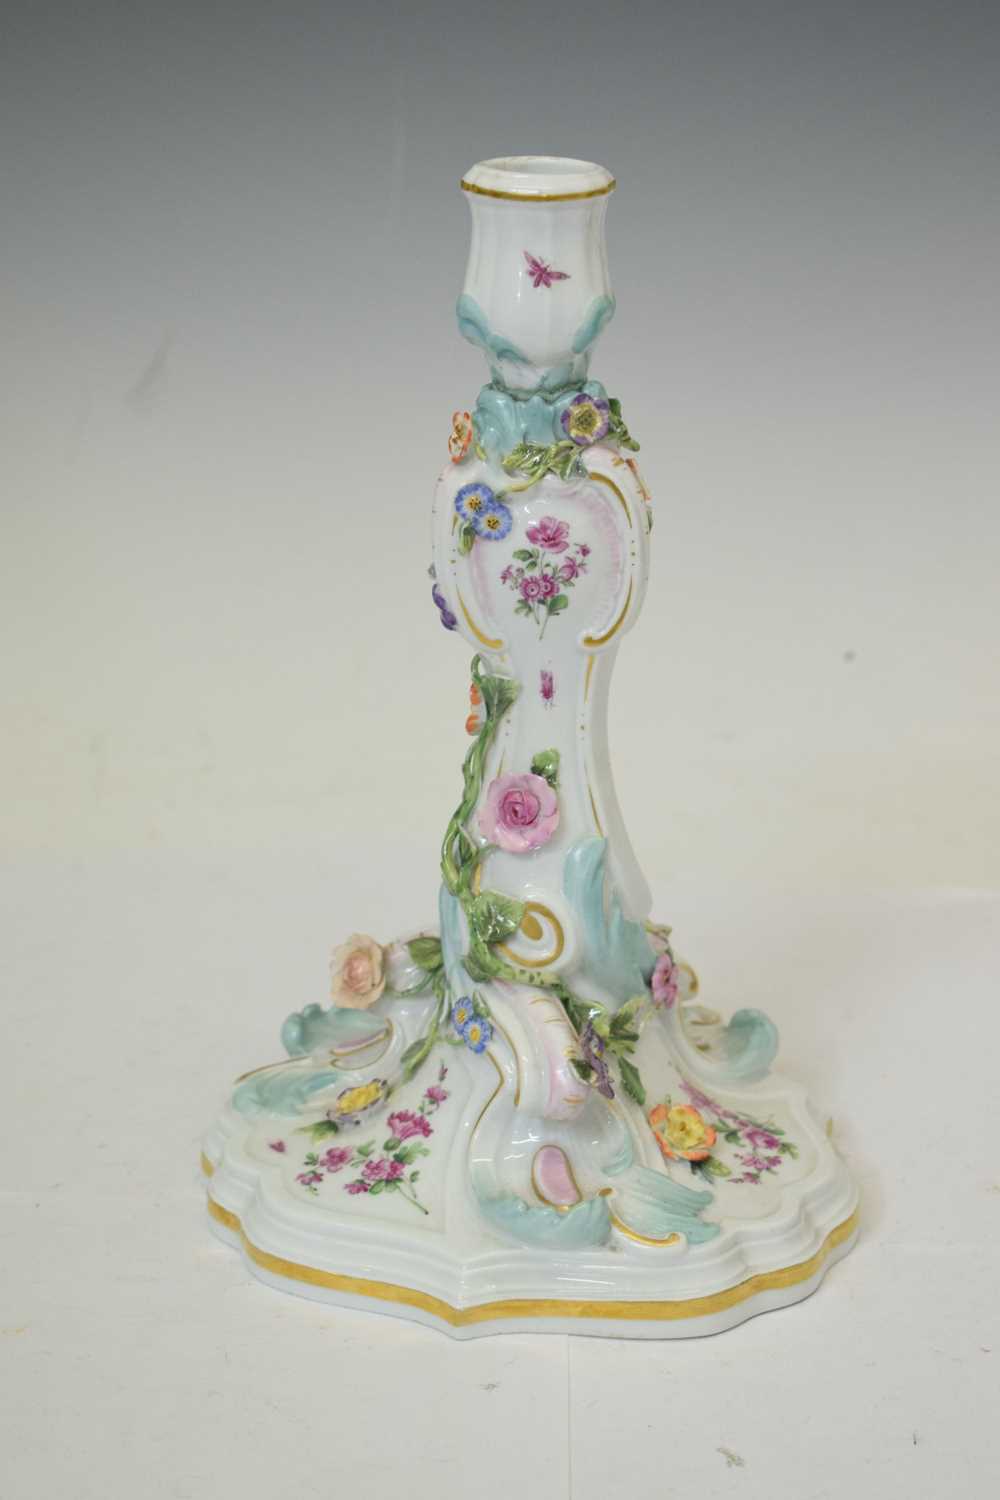 Late 19th/early 20th century Meissen porcelain candlestick - Image 3 of 9